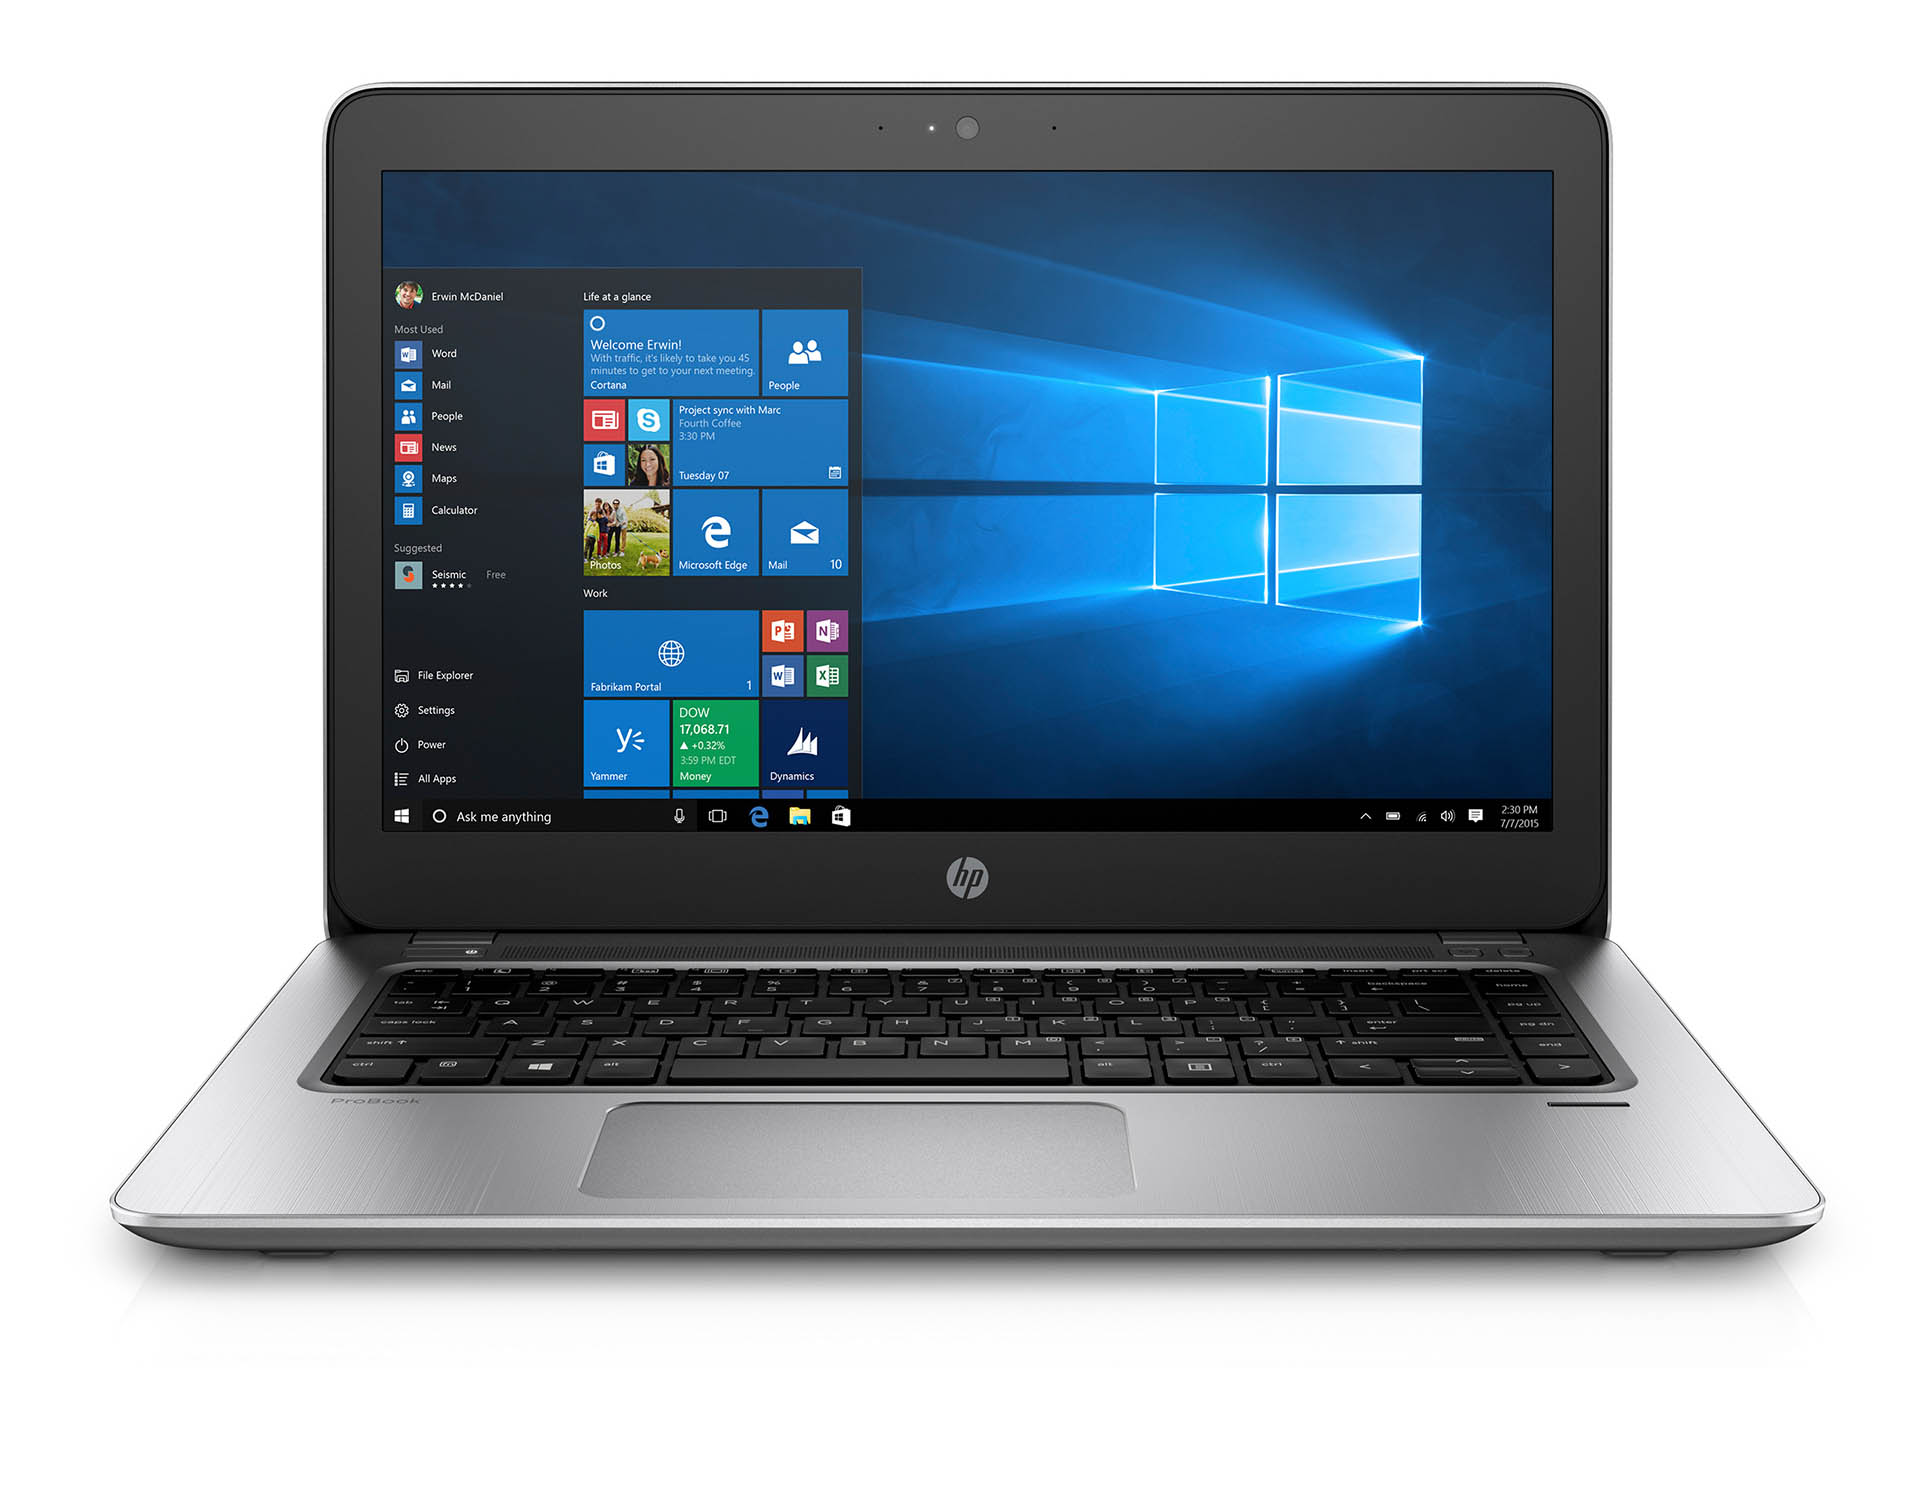 HP mt20 Mobile Thin Client